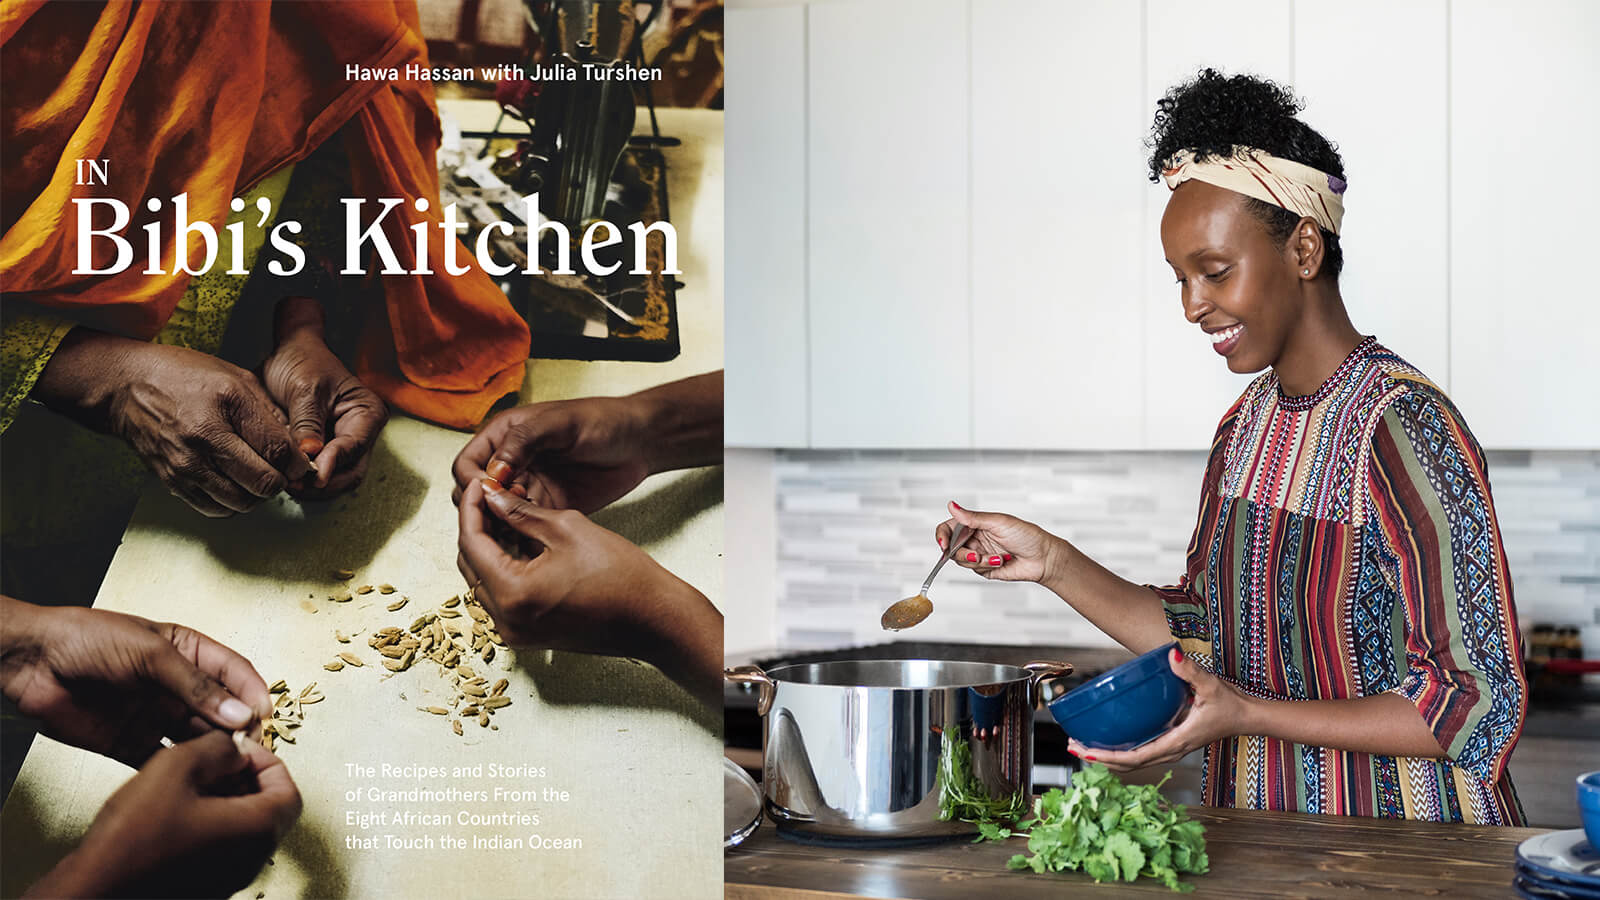 The cover of In Bibi's Kitchen cookbook and portrait of TV chef and author Hawa Hassan cooking